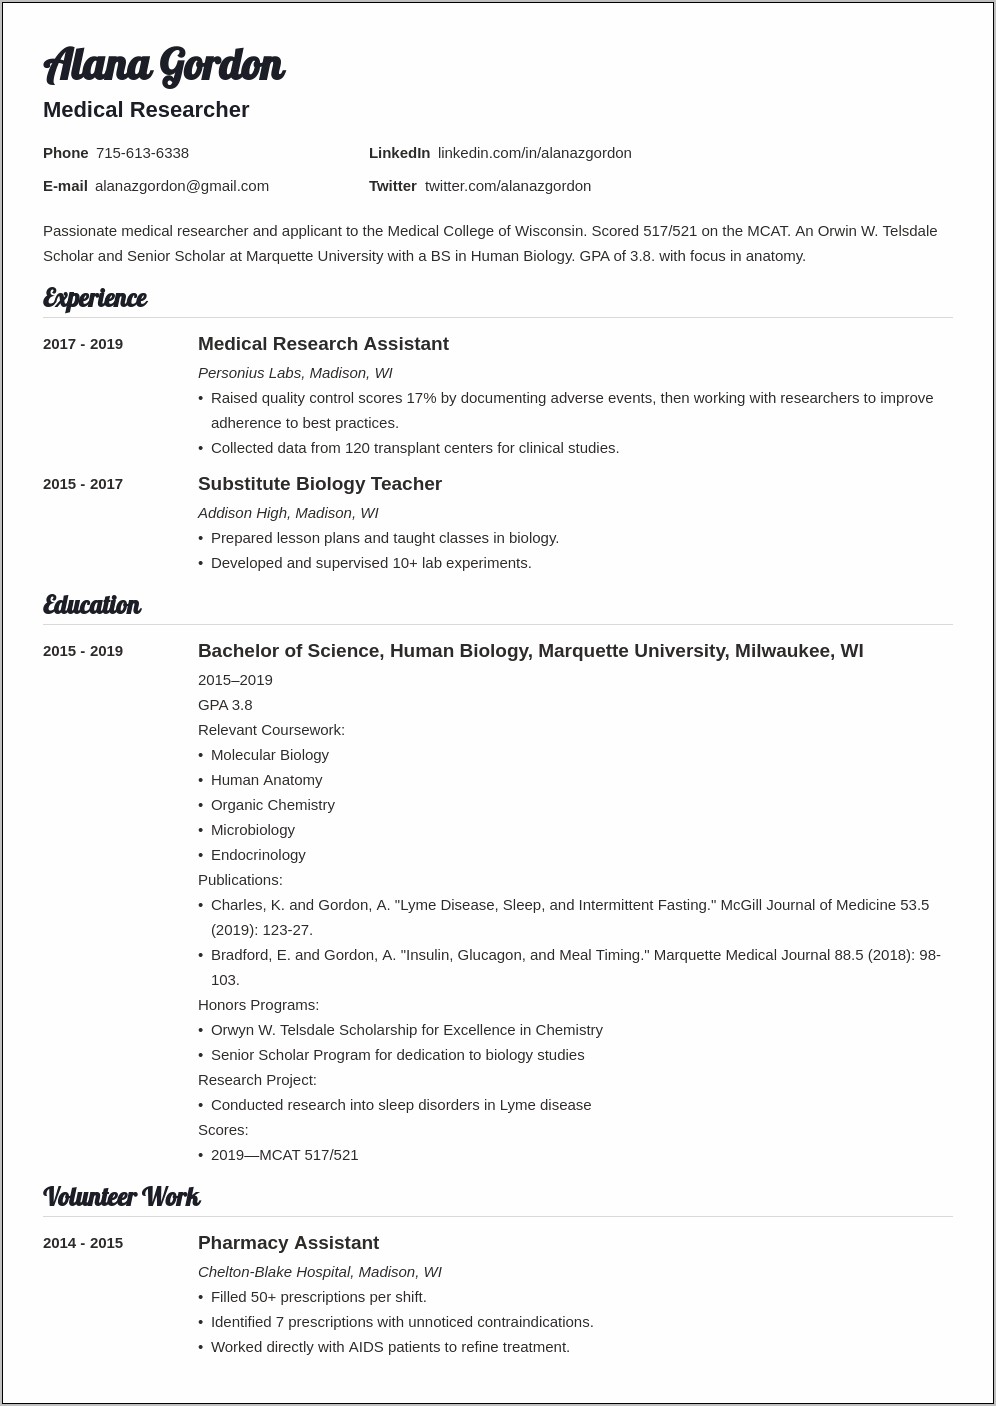 Resume Objective For Medical School